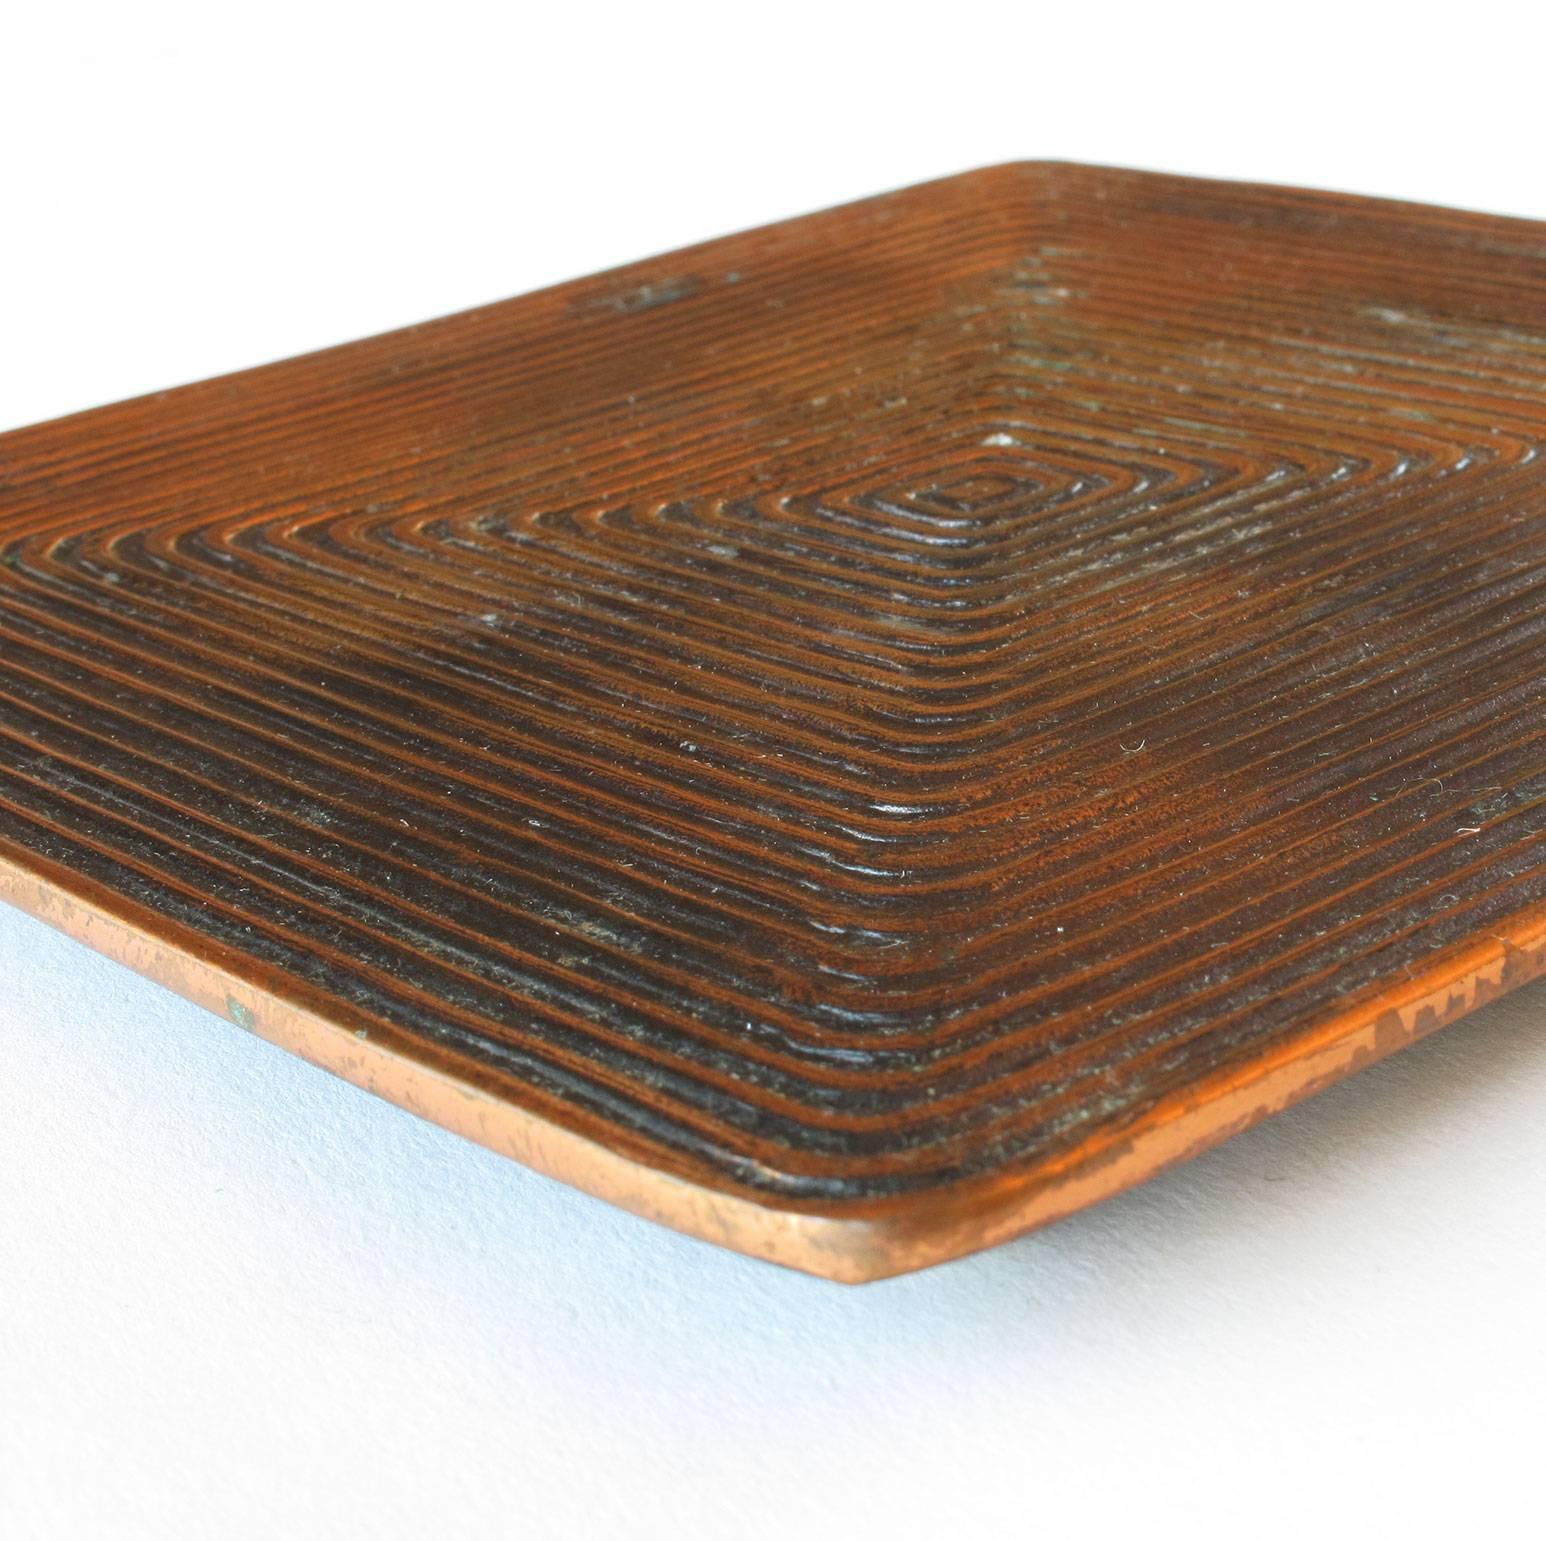 American Ben Seibel Square Shaped Copper Tray with Concentric Squares Design Jenfred Ware For Sale